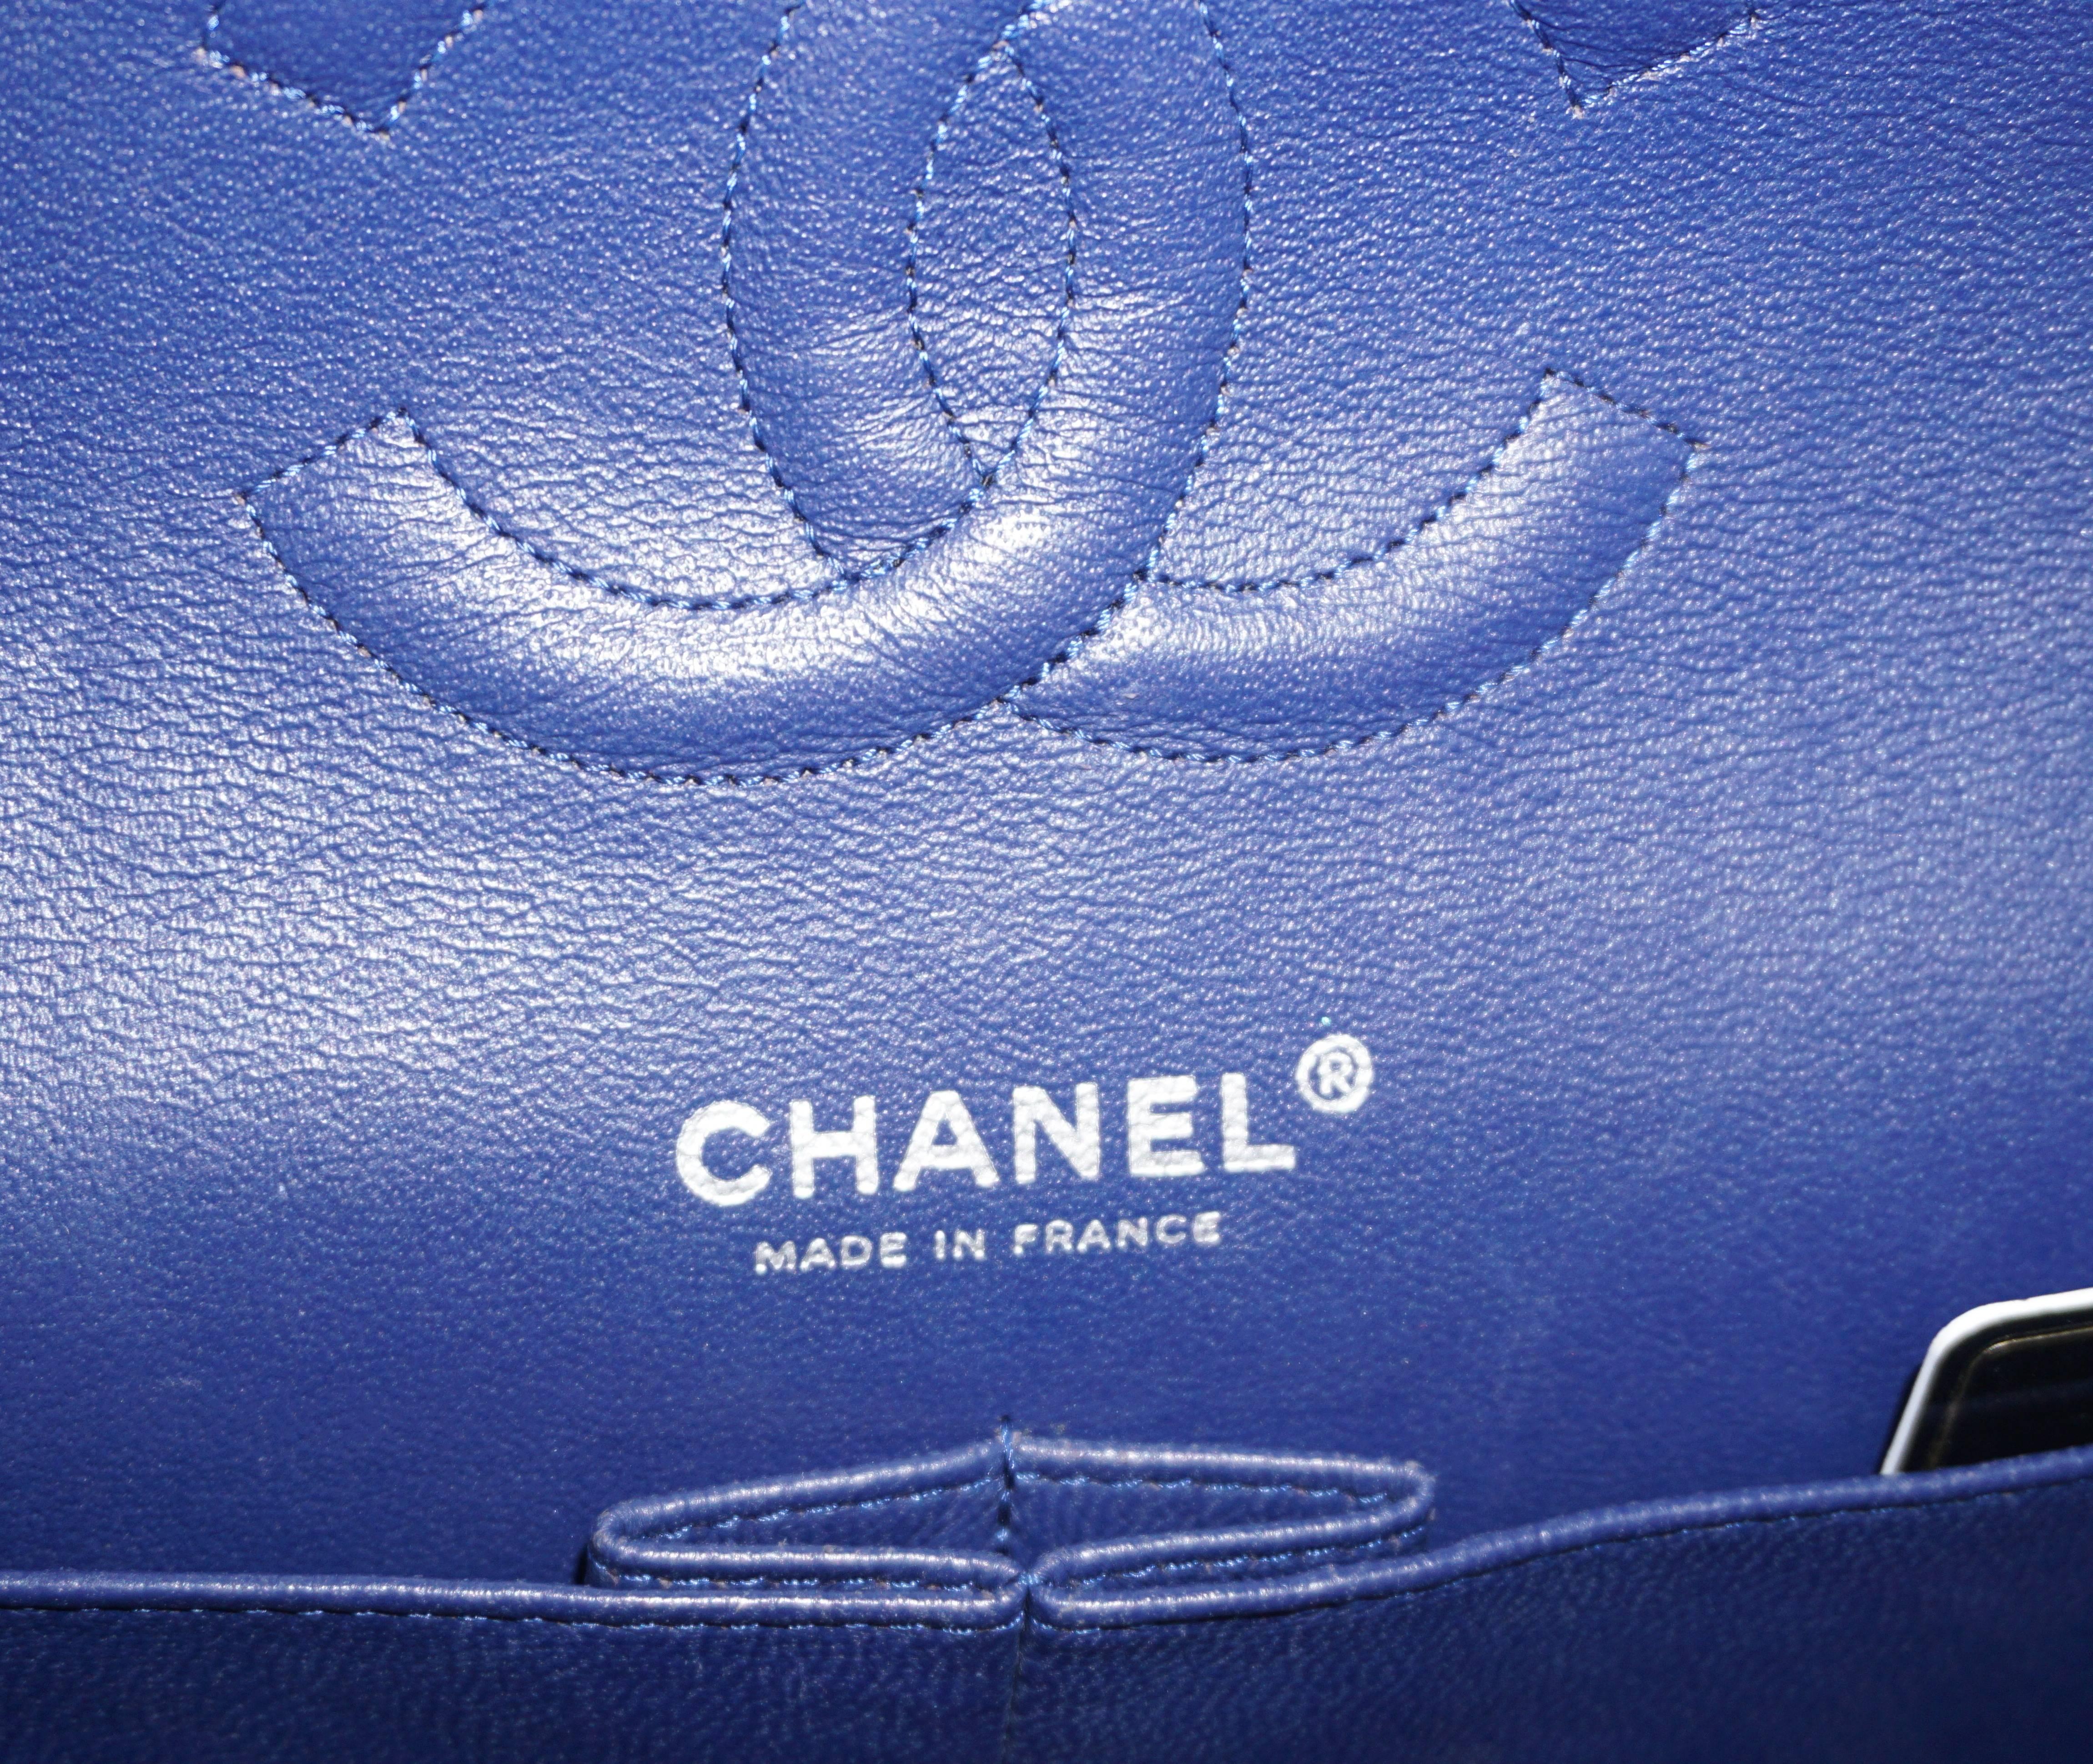 Chanel Blue/Silver Perforated Leather Medium Double Flap Handbag-SHW-2006 2